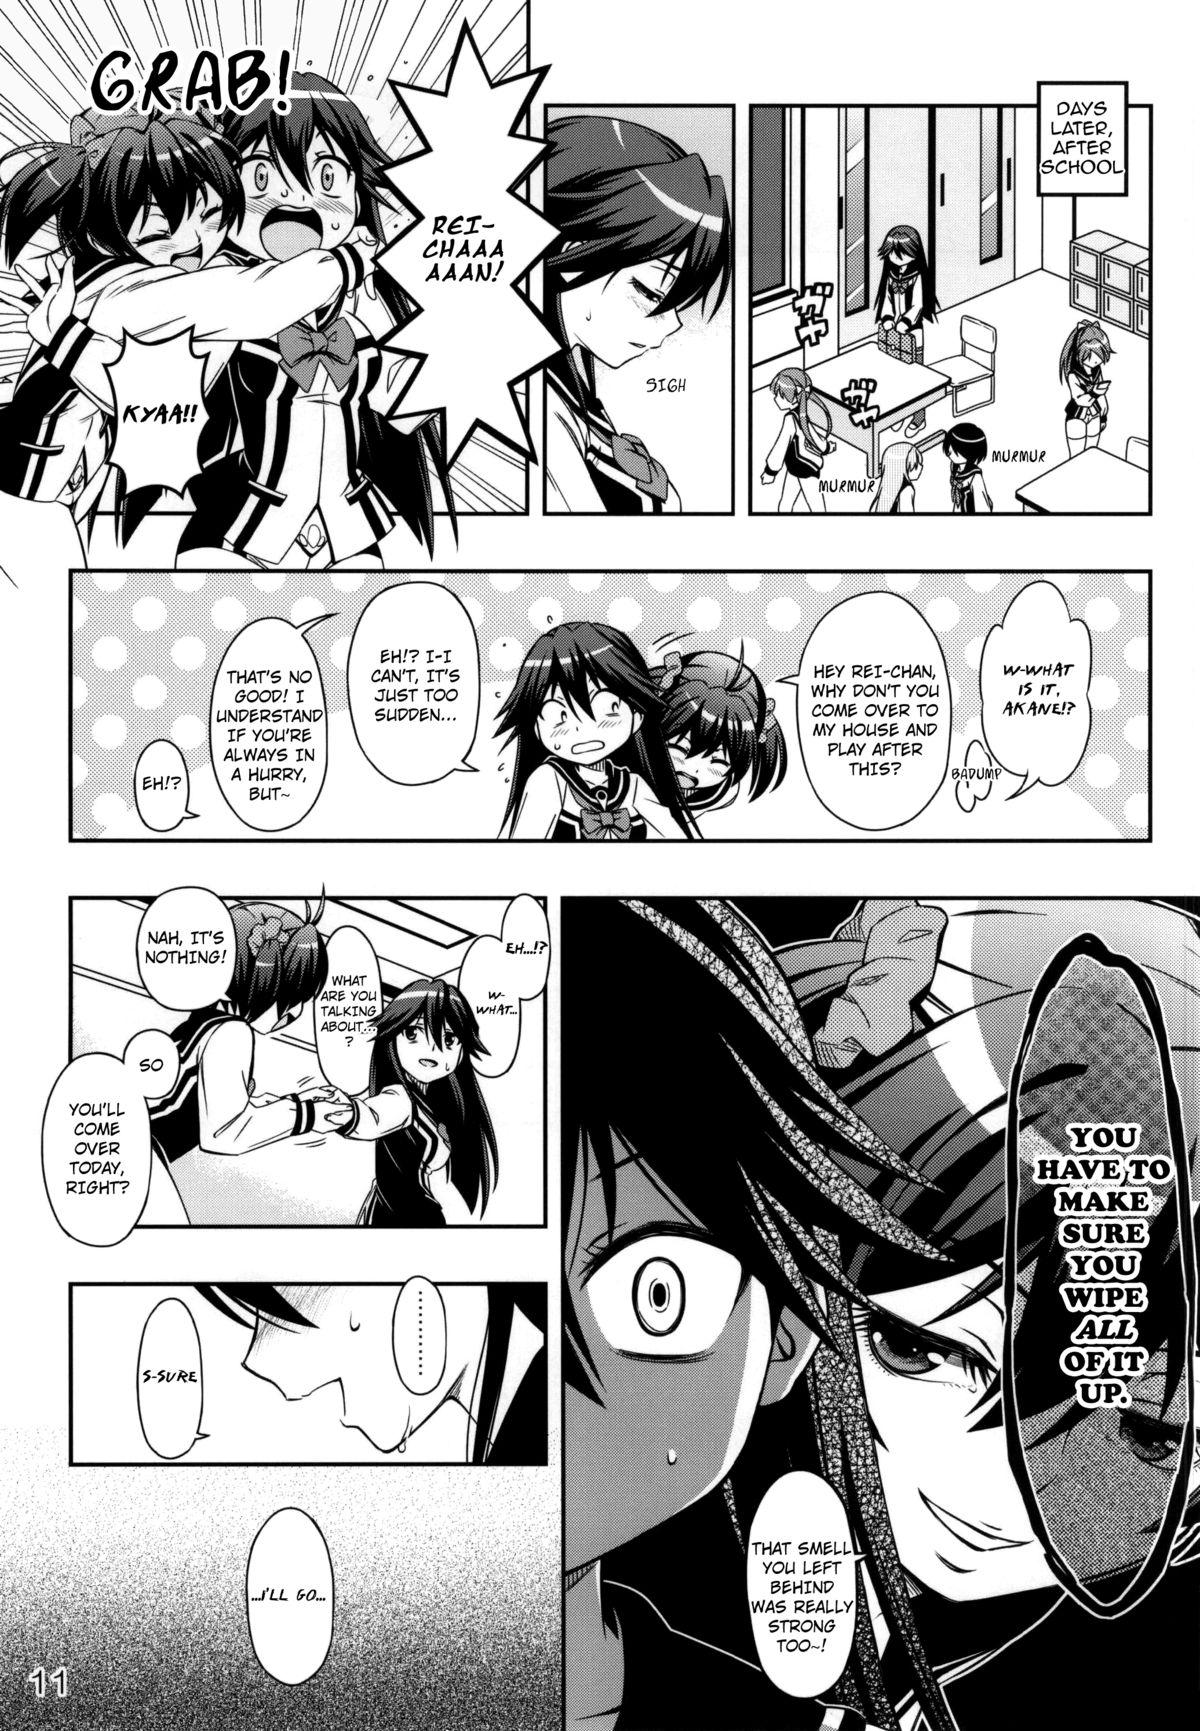 Old Vs Young AkaRei☆Operation - Vividred operation Morrita - Page 10